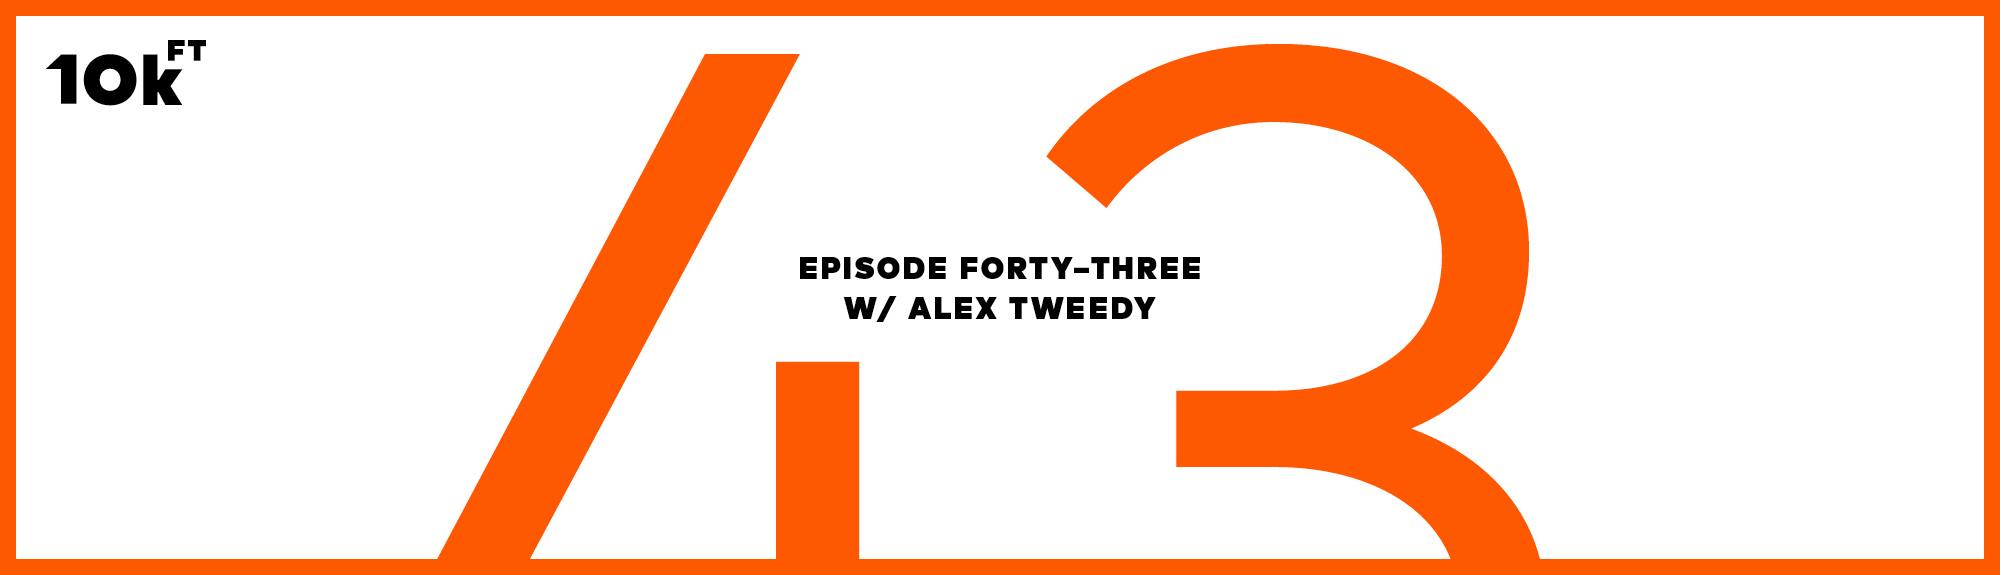 Orange rectangle with a white inside background. Top right corner has "10k ft" written. In the middle, the text reads "Episode Forty-Three w/ Alex Tweedy". A large "43" is written in orange behind this middle text